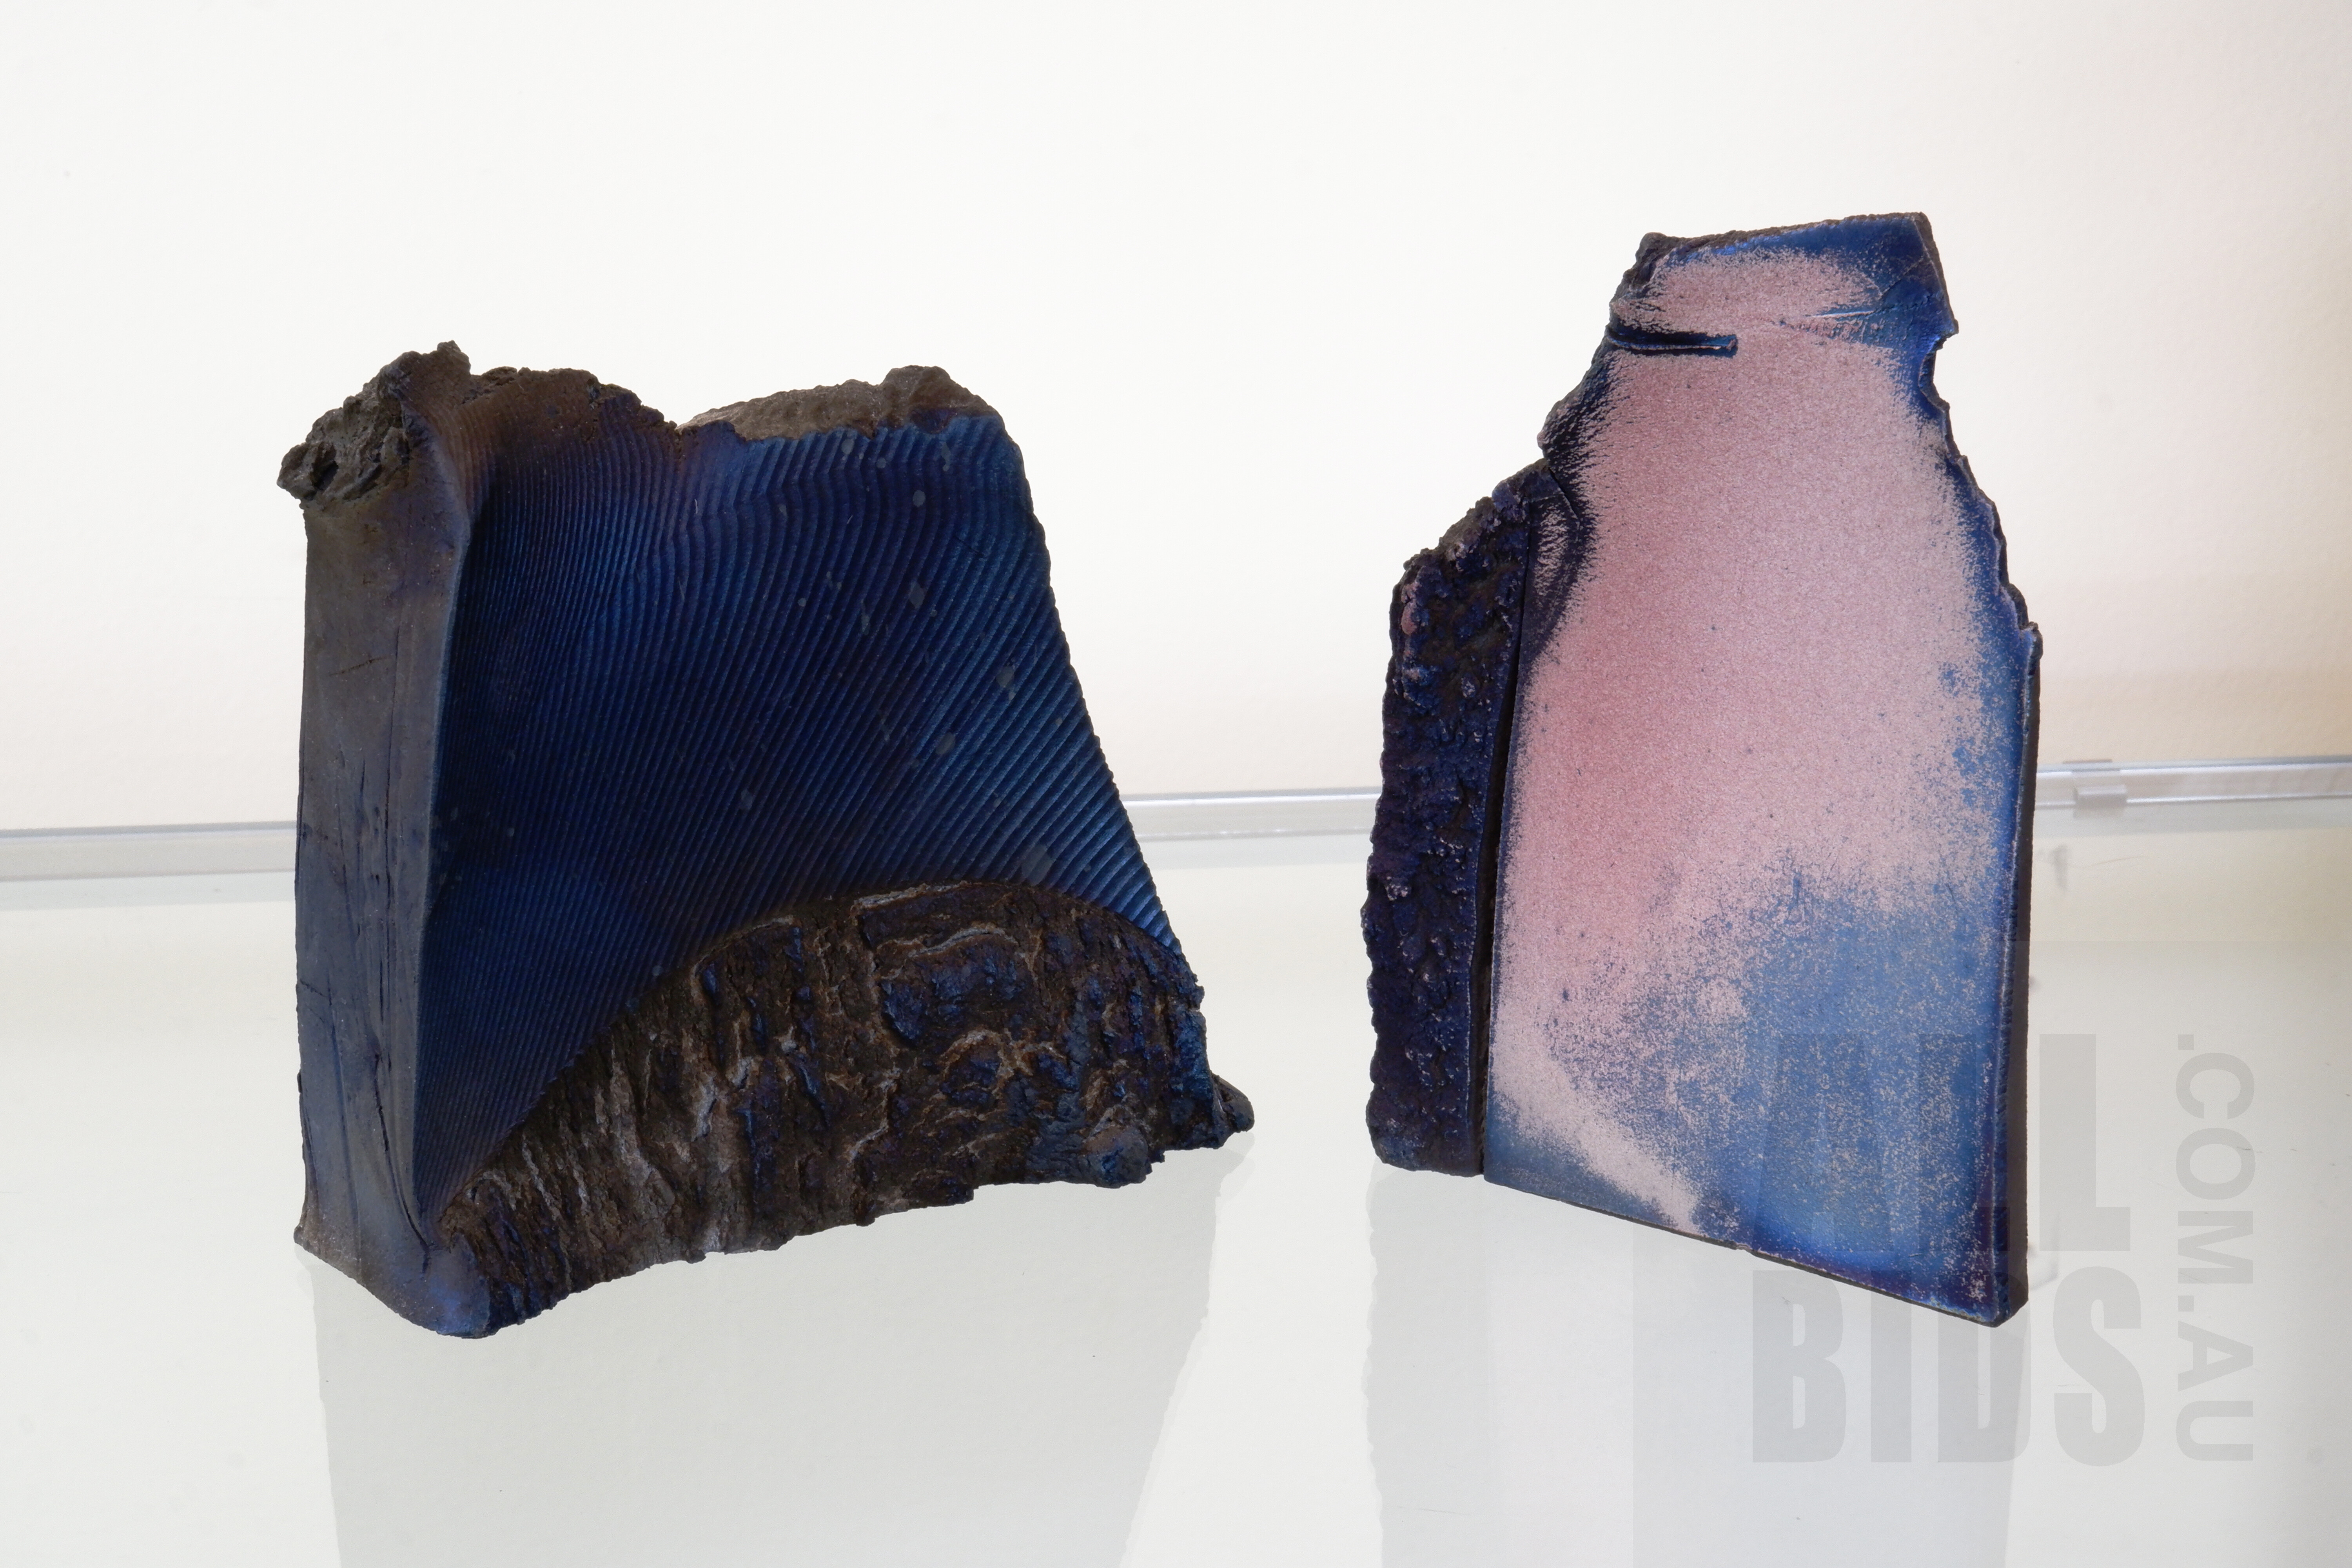 'Alan Watt (1941-)Two Black Fired Earthenware Forms with Terra Sigillata and Copper Soda Fuming, 2004'